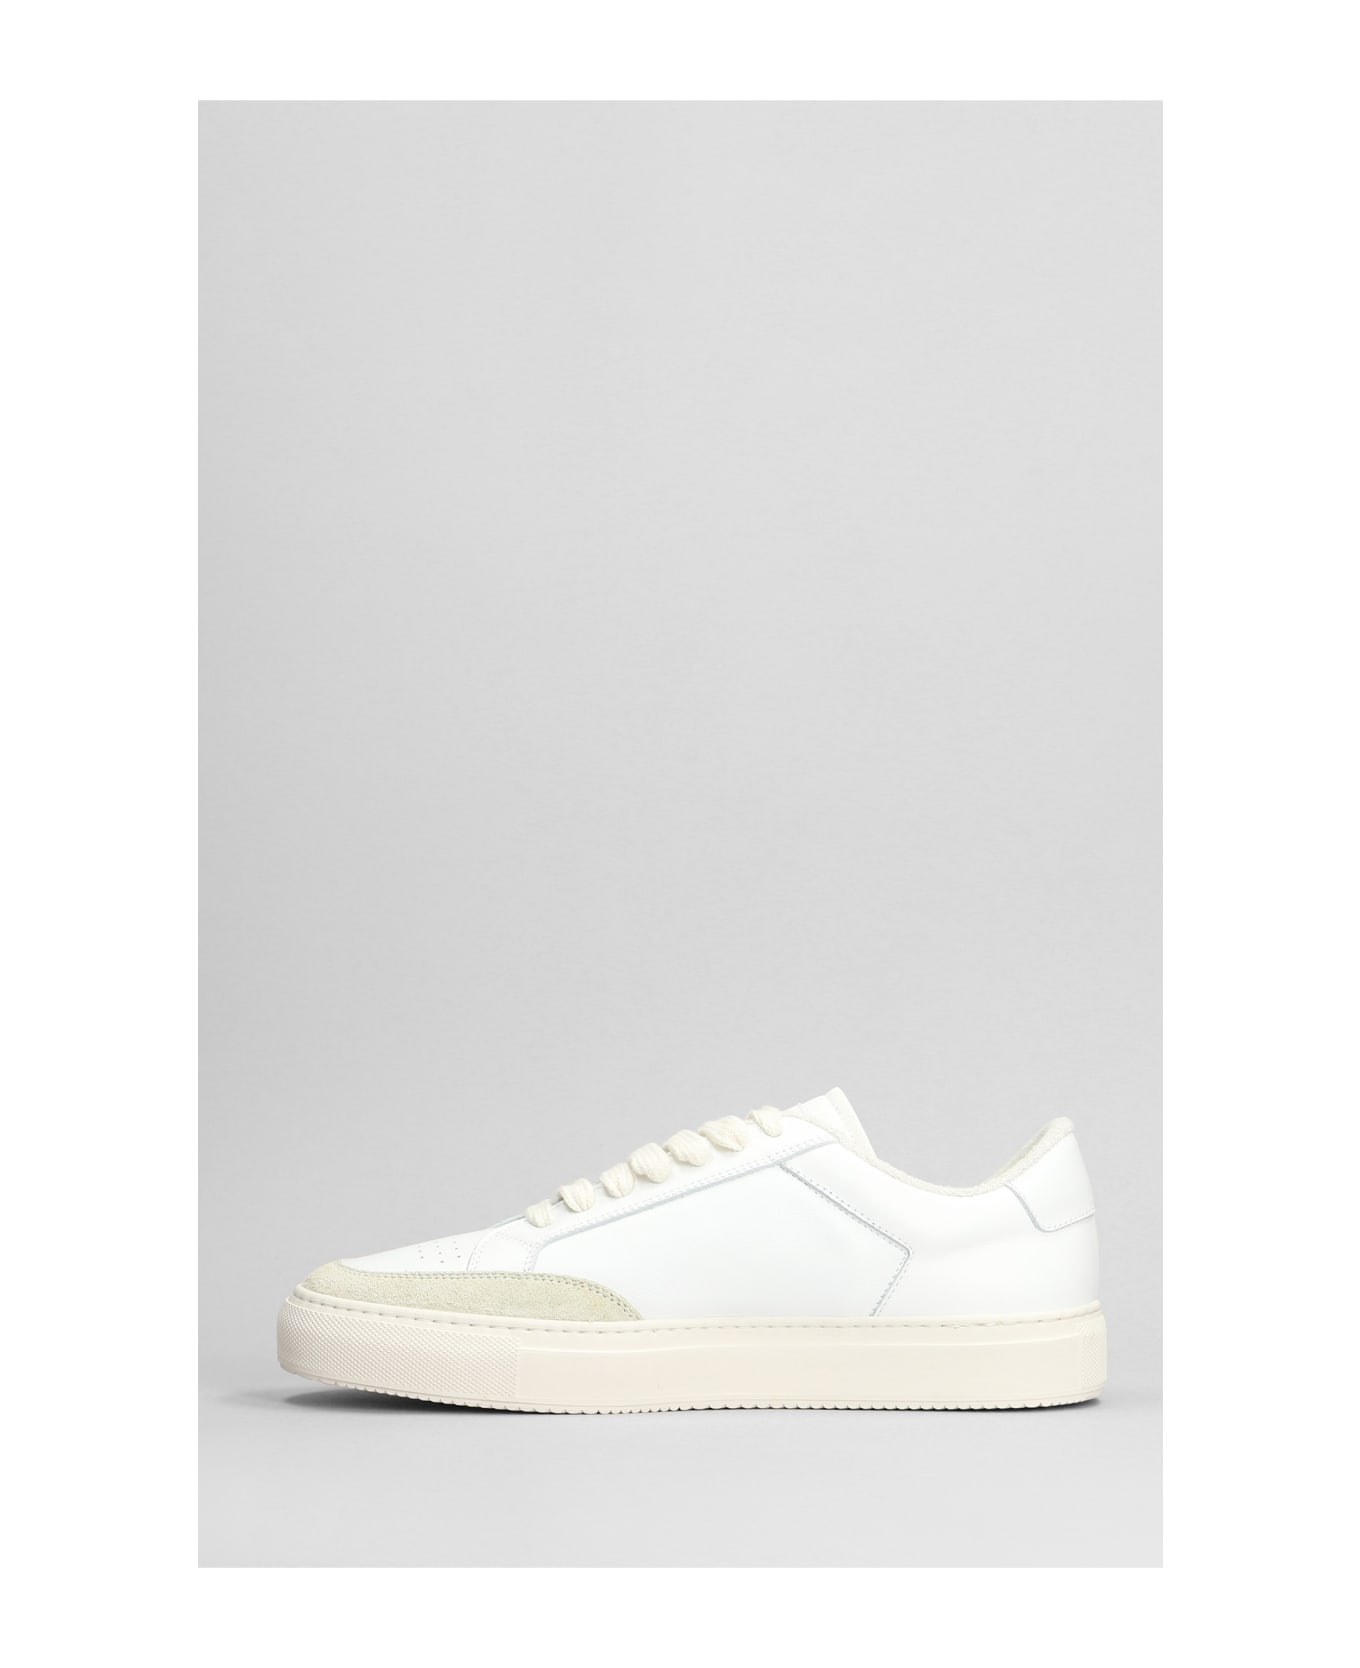 Common Projects Tennis Pro Sneakers In White Leather - White